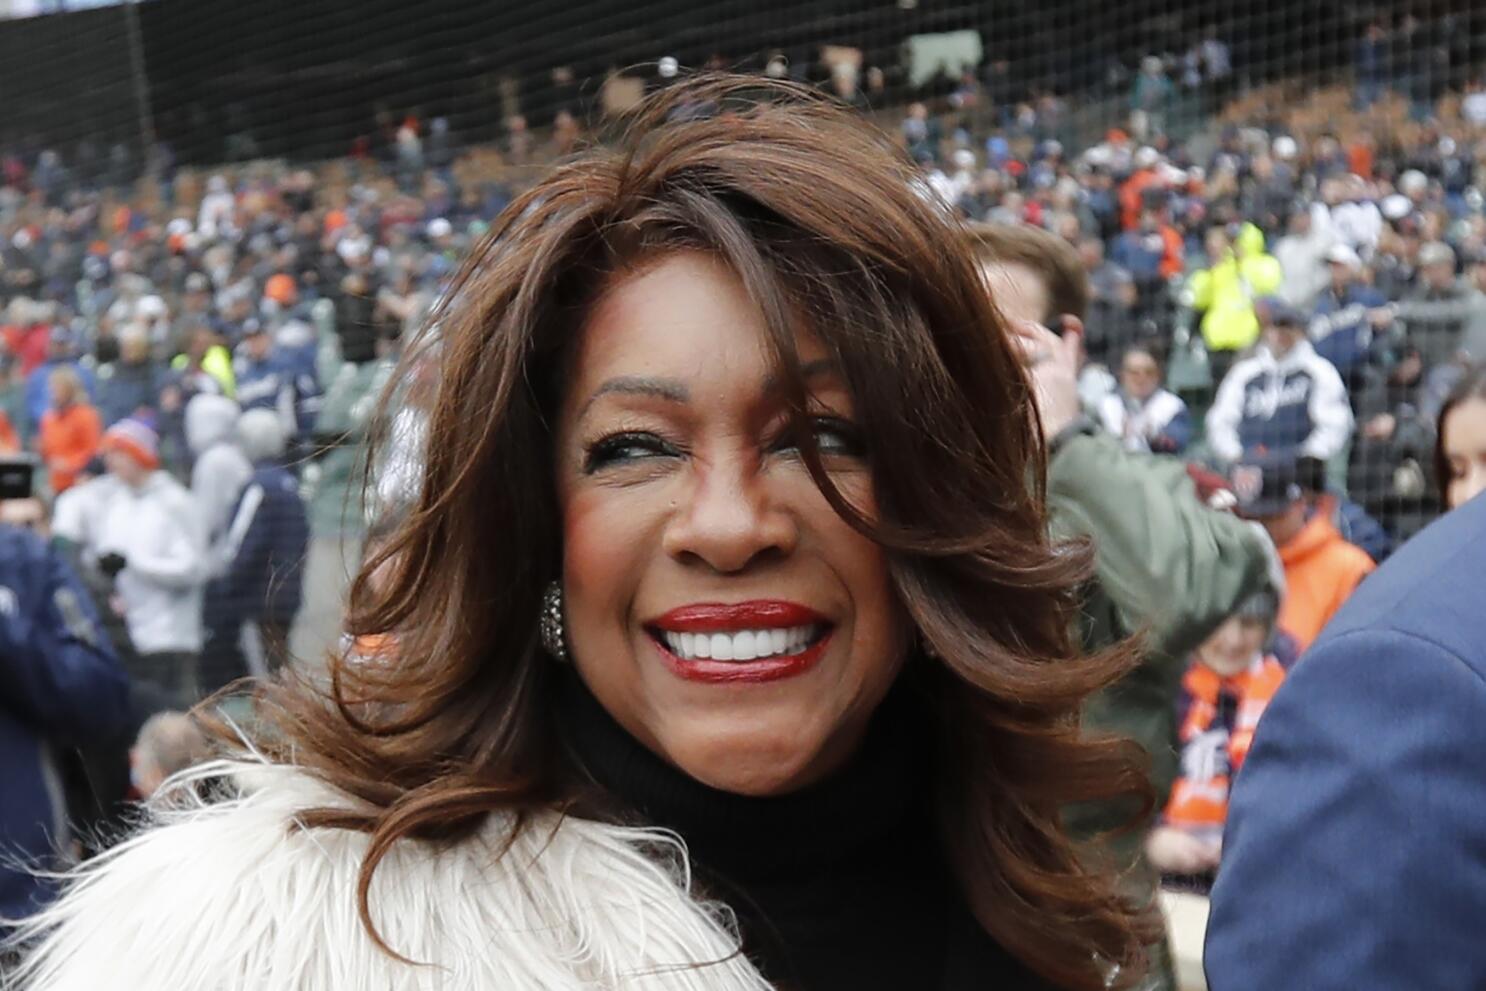 Here's who will sing national anthem on Detroit Tigers' Opening Day